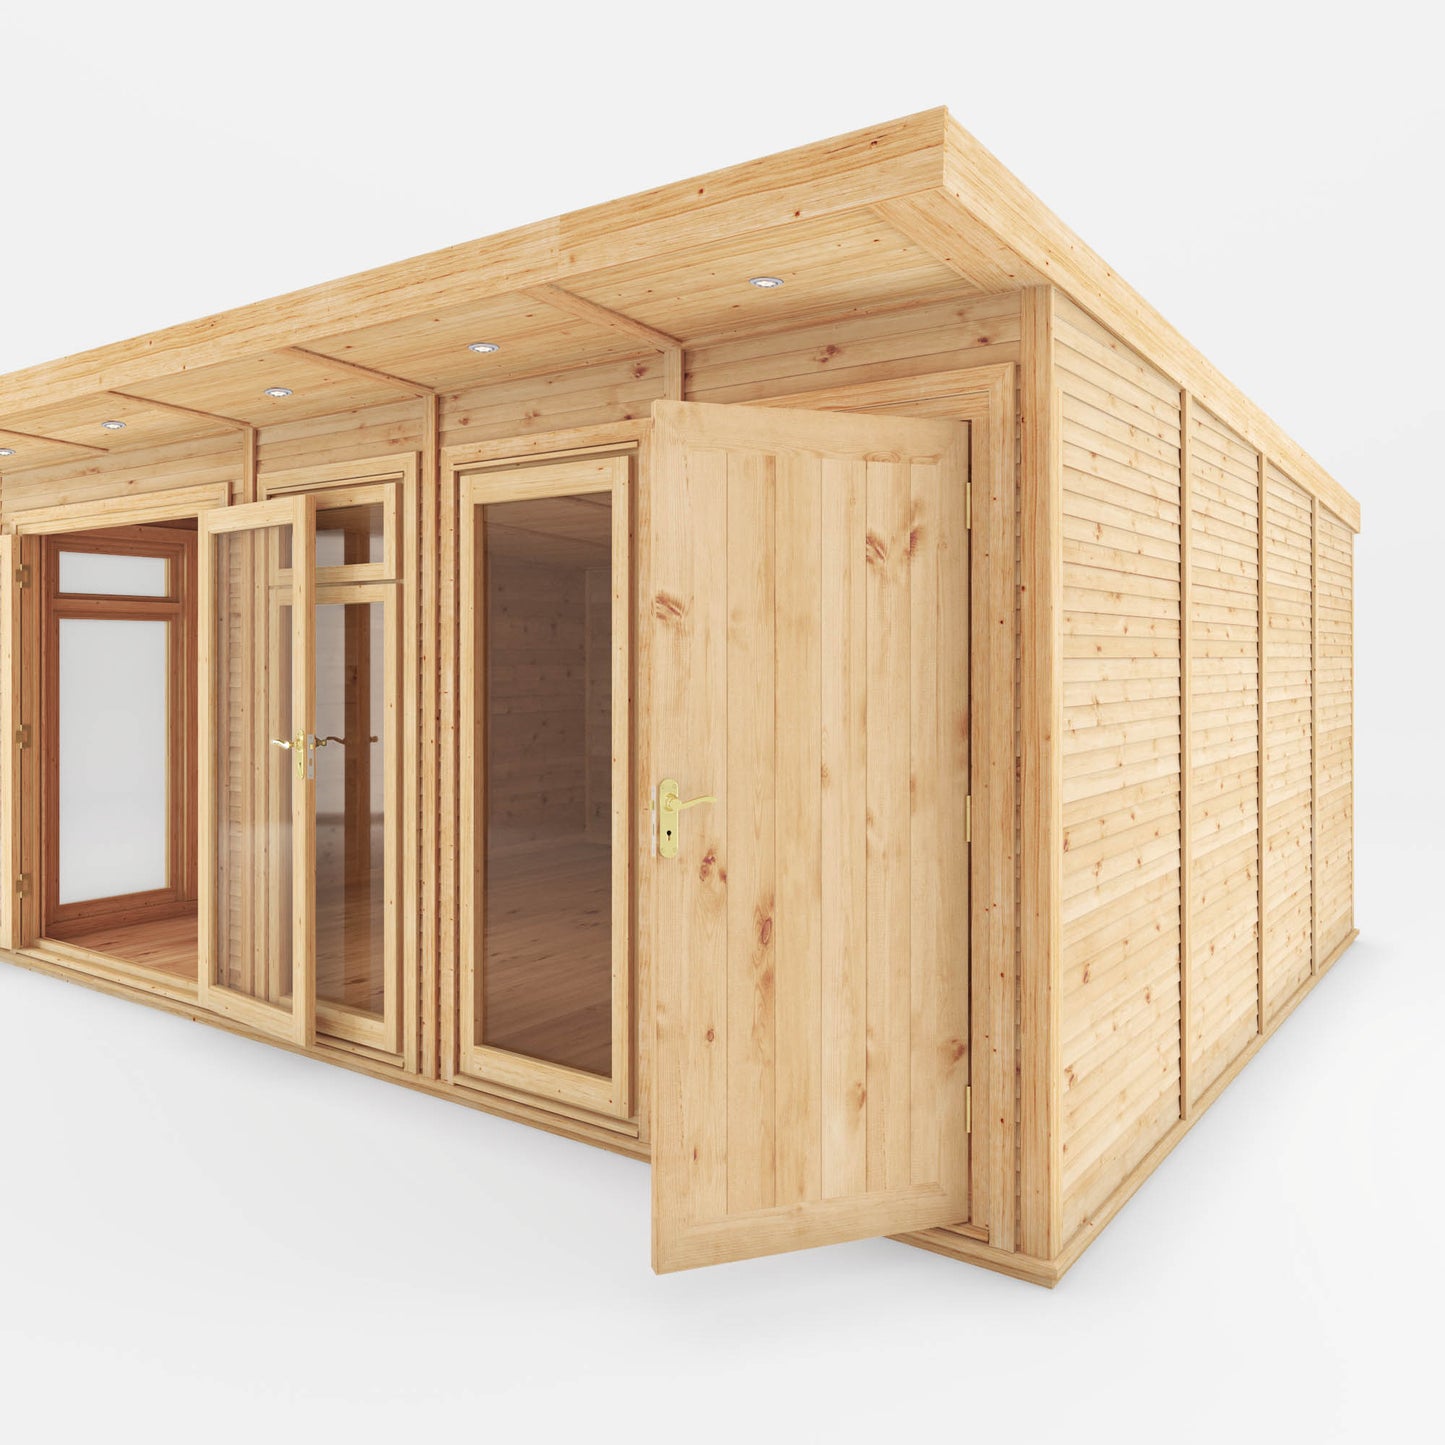 5 x 4m Insulated Garden Room with Side Shed